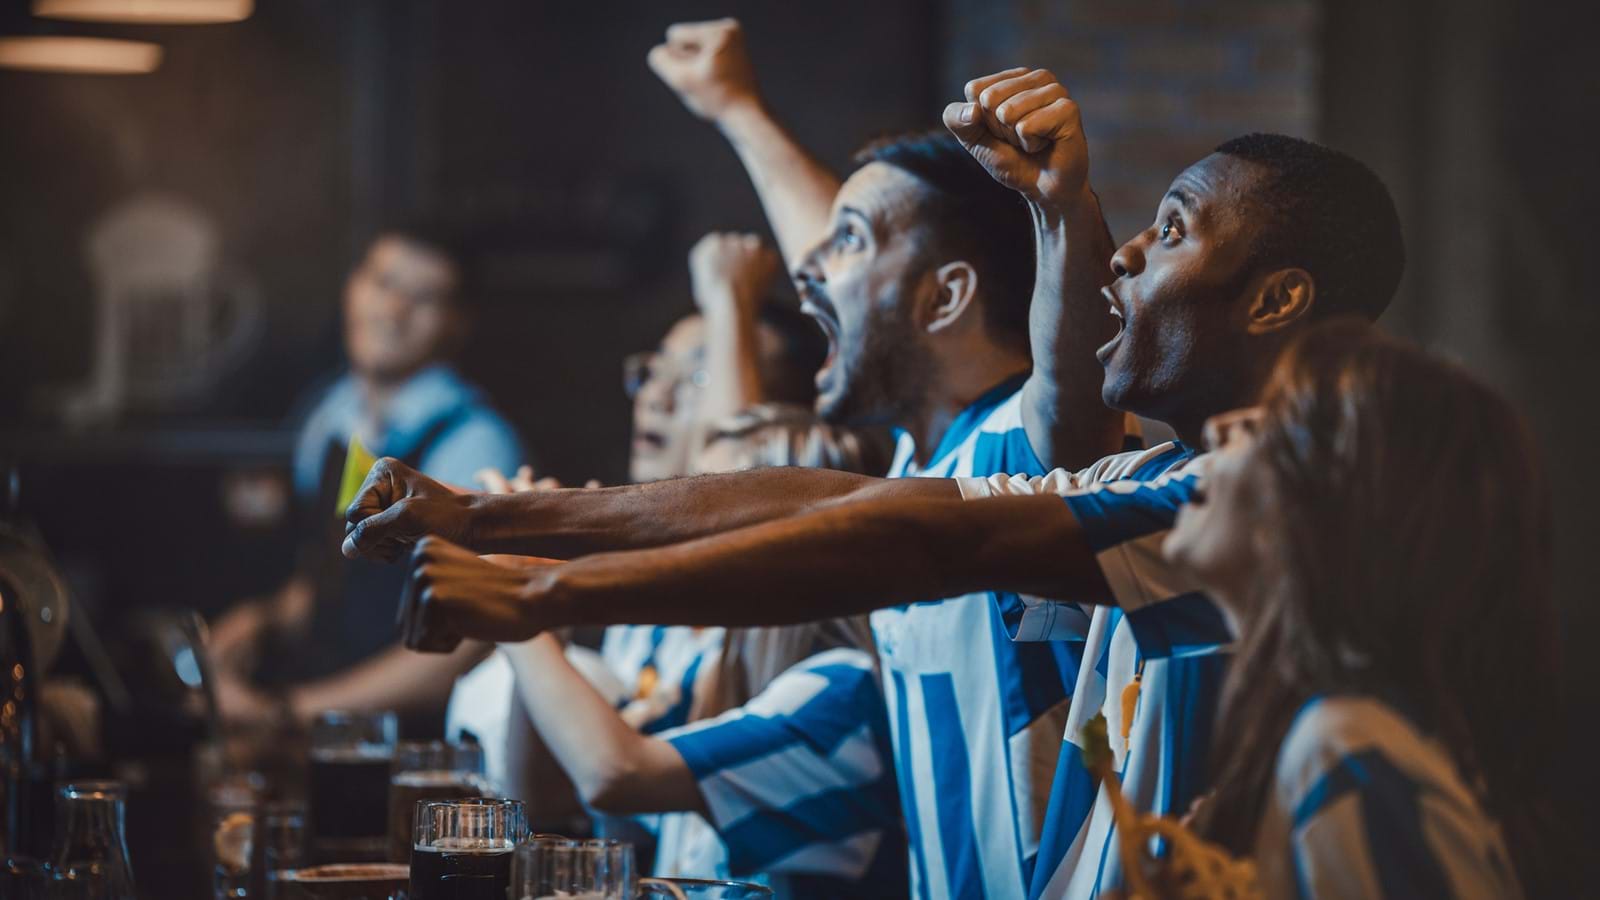 Football fans cheering in a bar